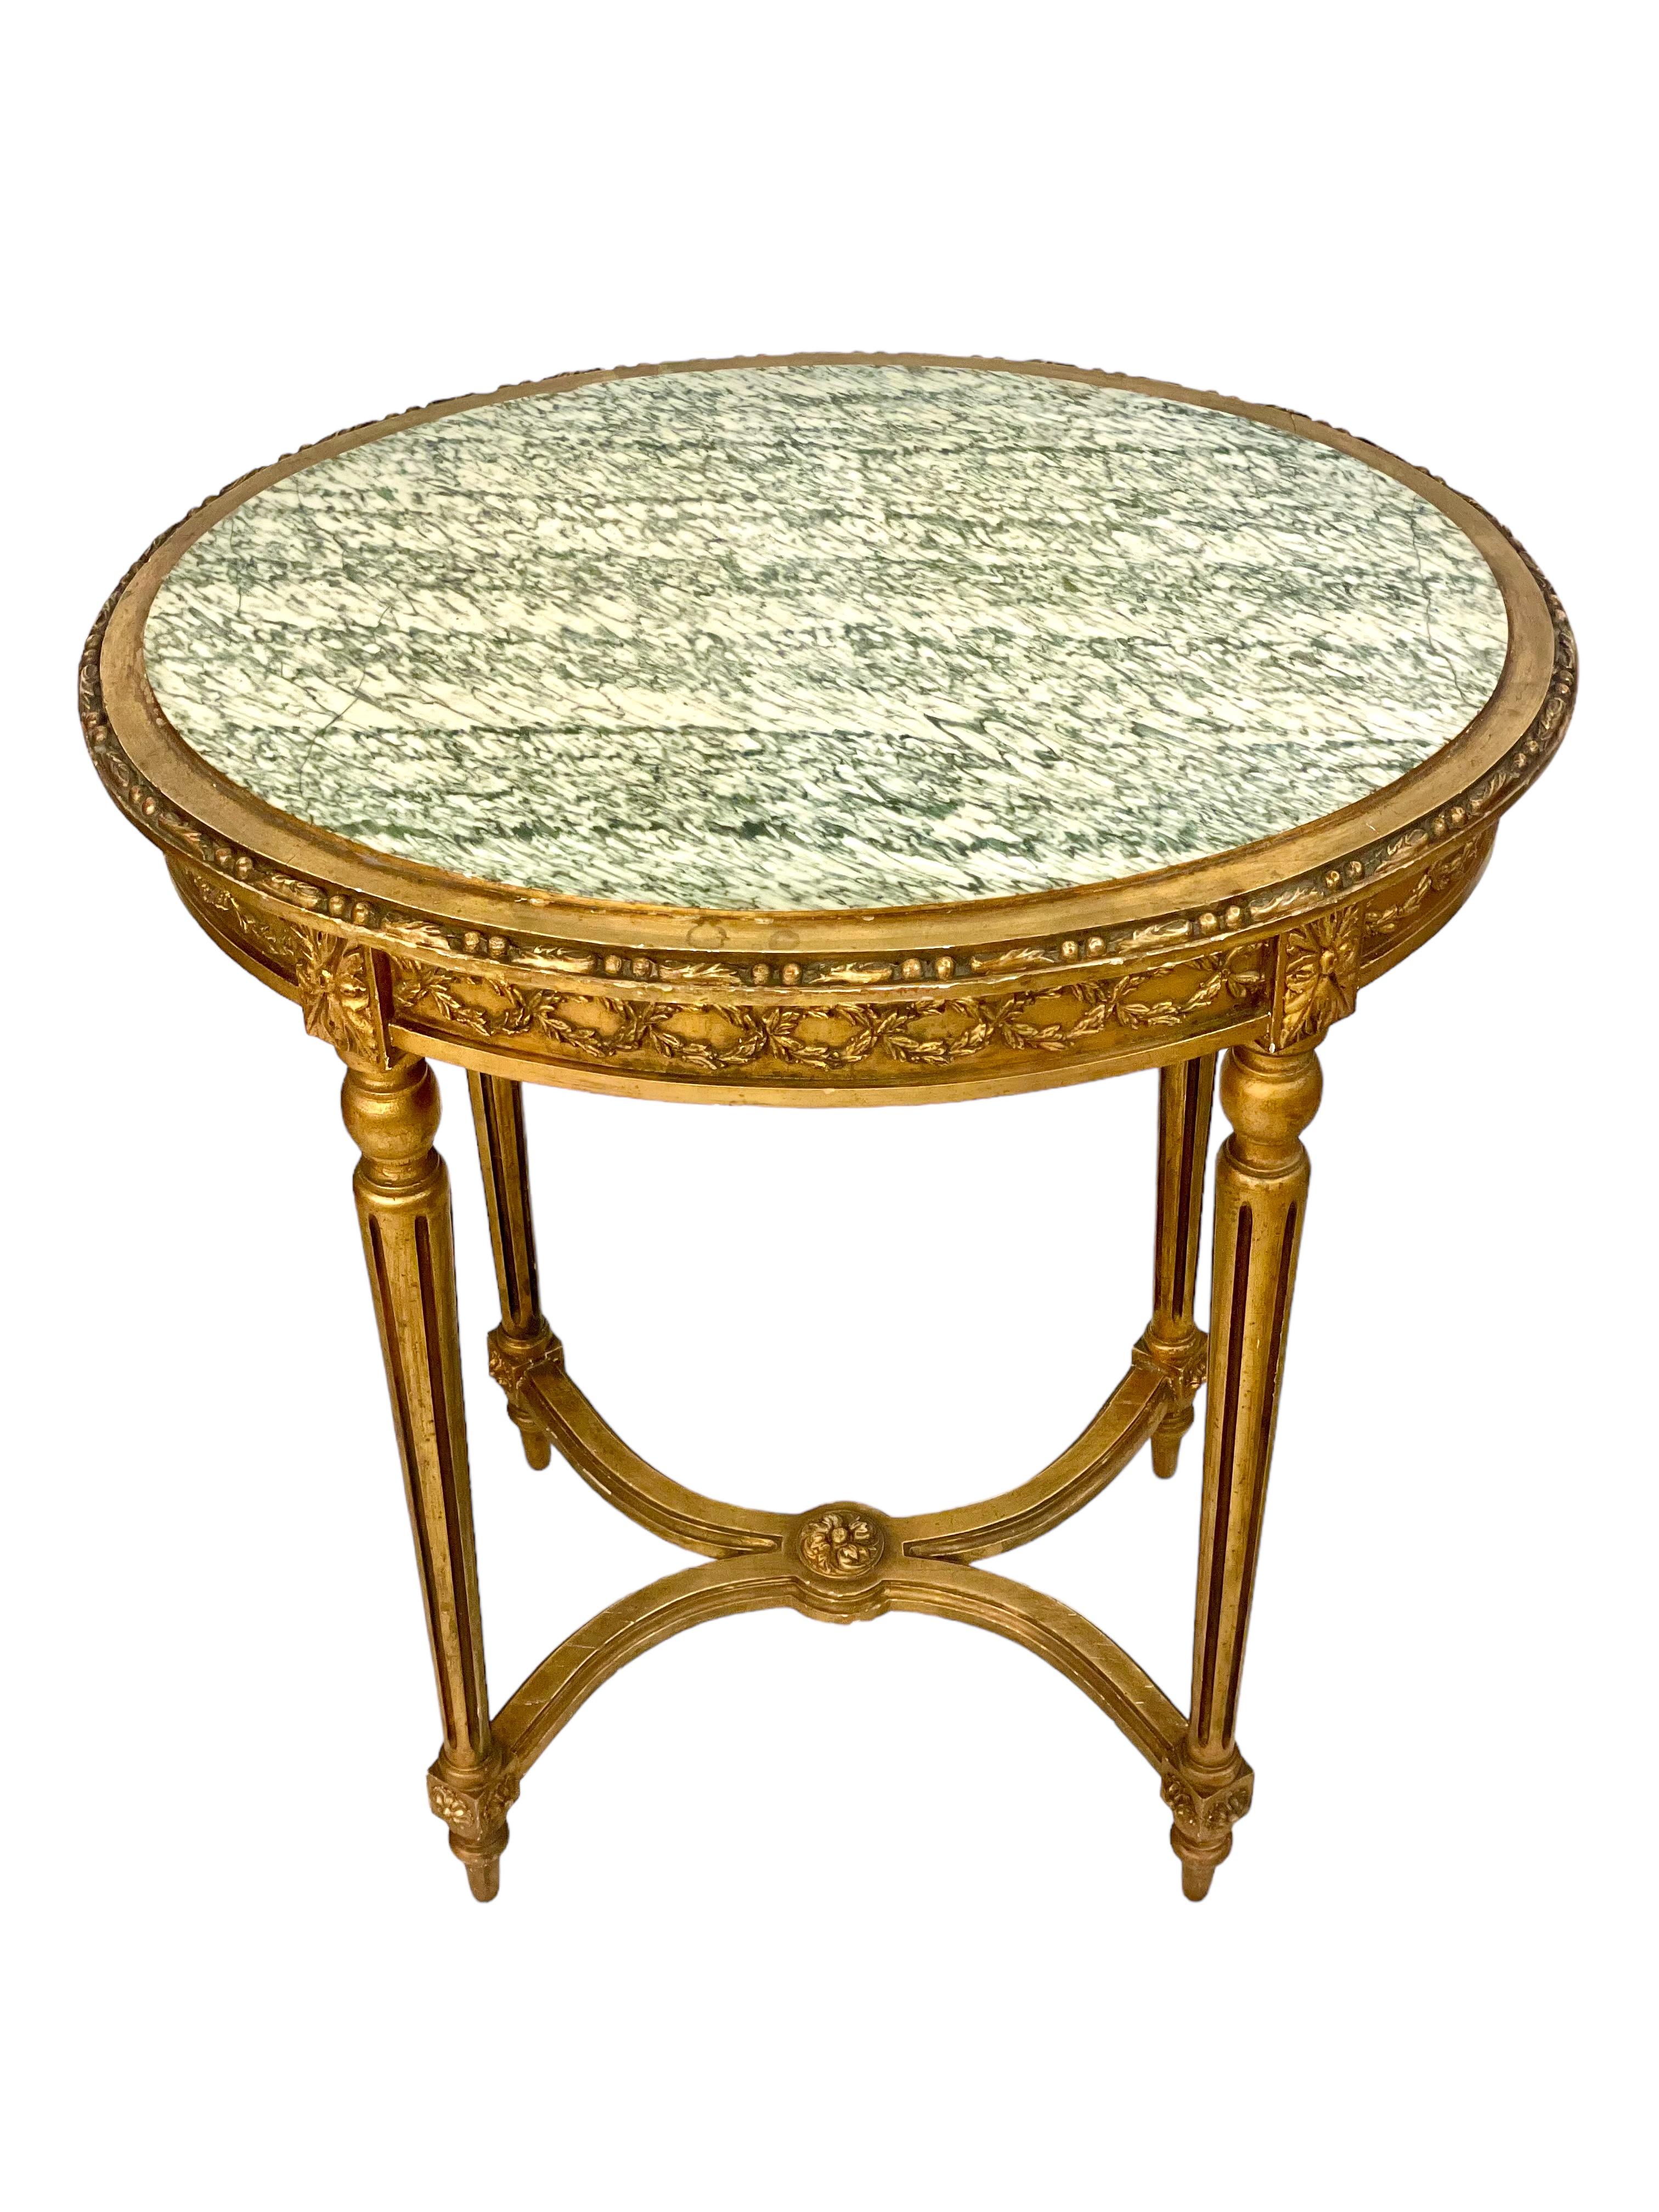 A very decorative Louis XVI-style Napoleon III center or side table in carved and gilded wood, and featuring an oval grey-green veined marble top. This pretty little table dates from the 19th century, and boasts abundant and exquisite carvings in